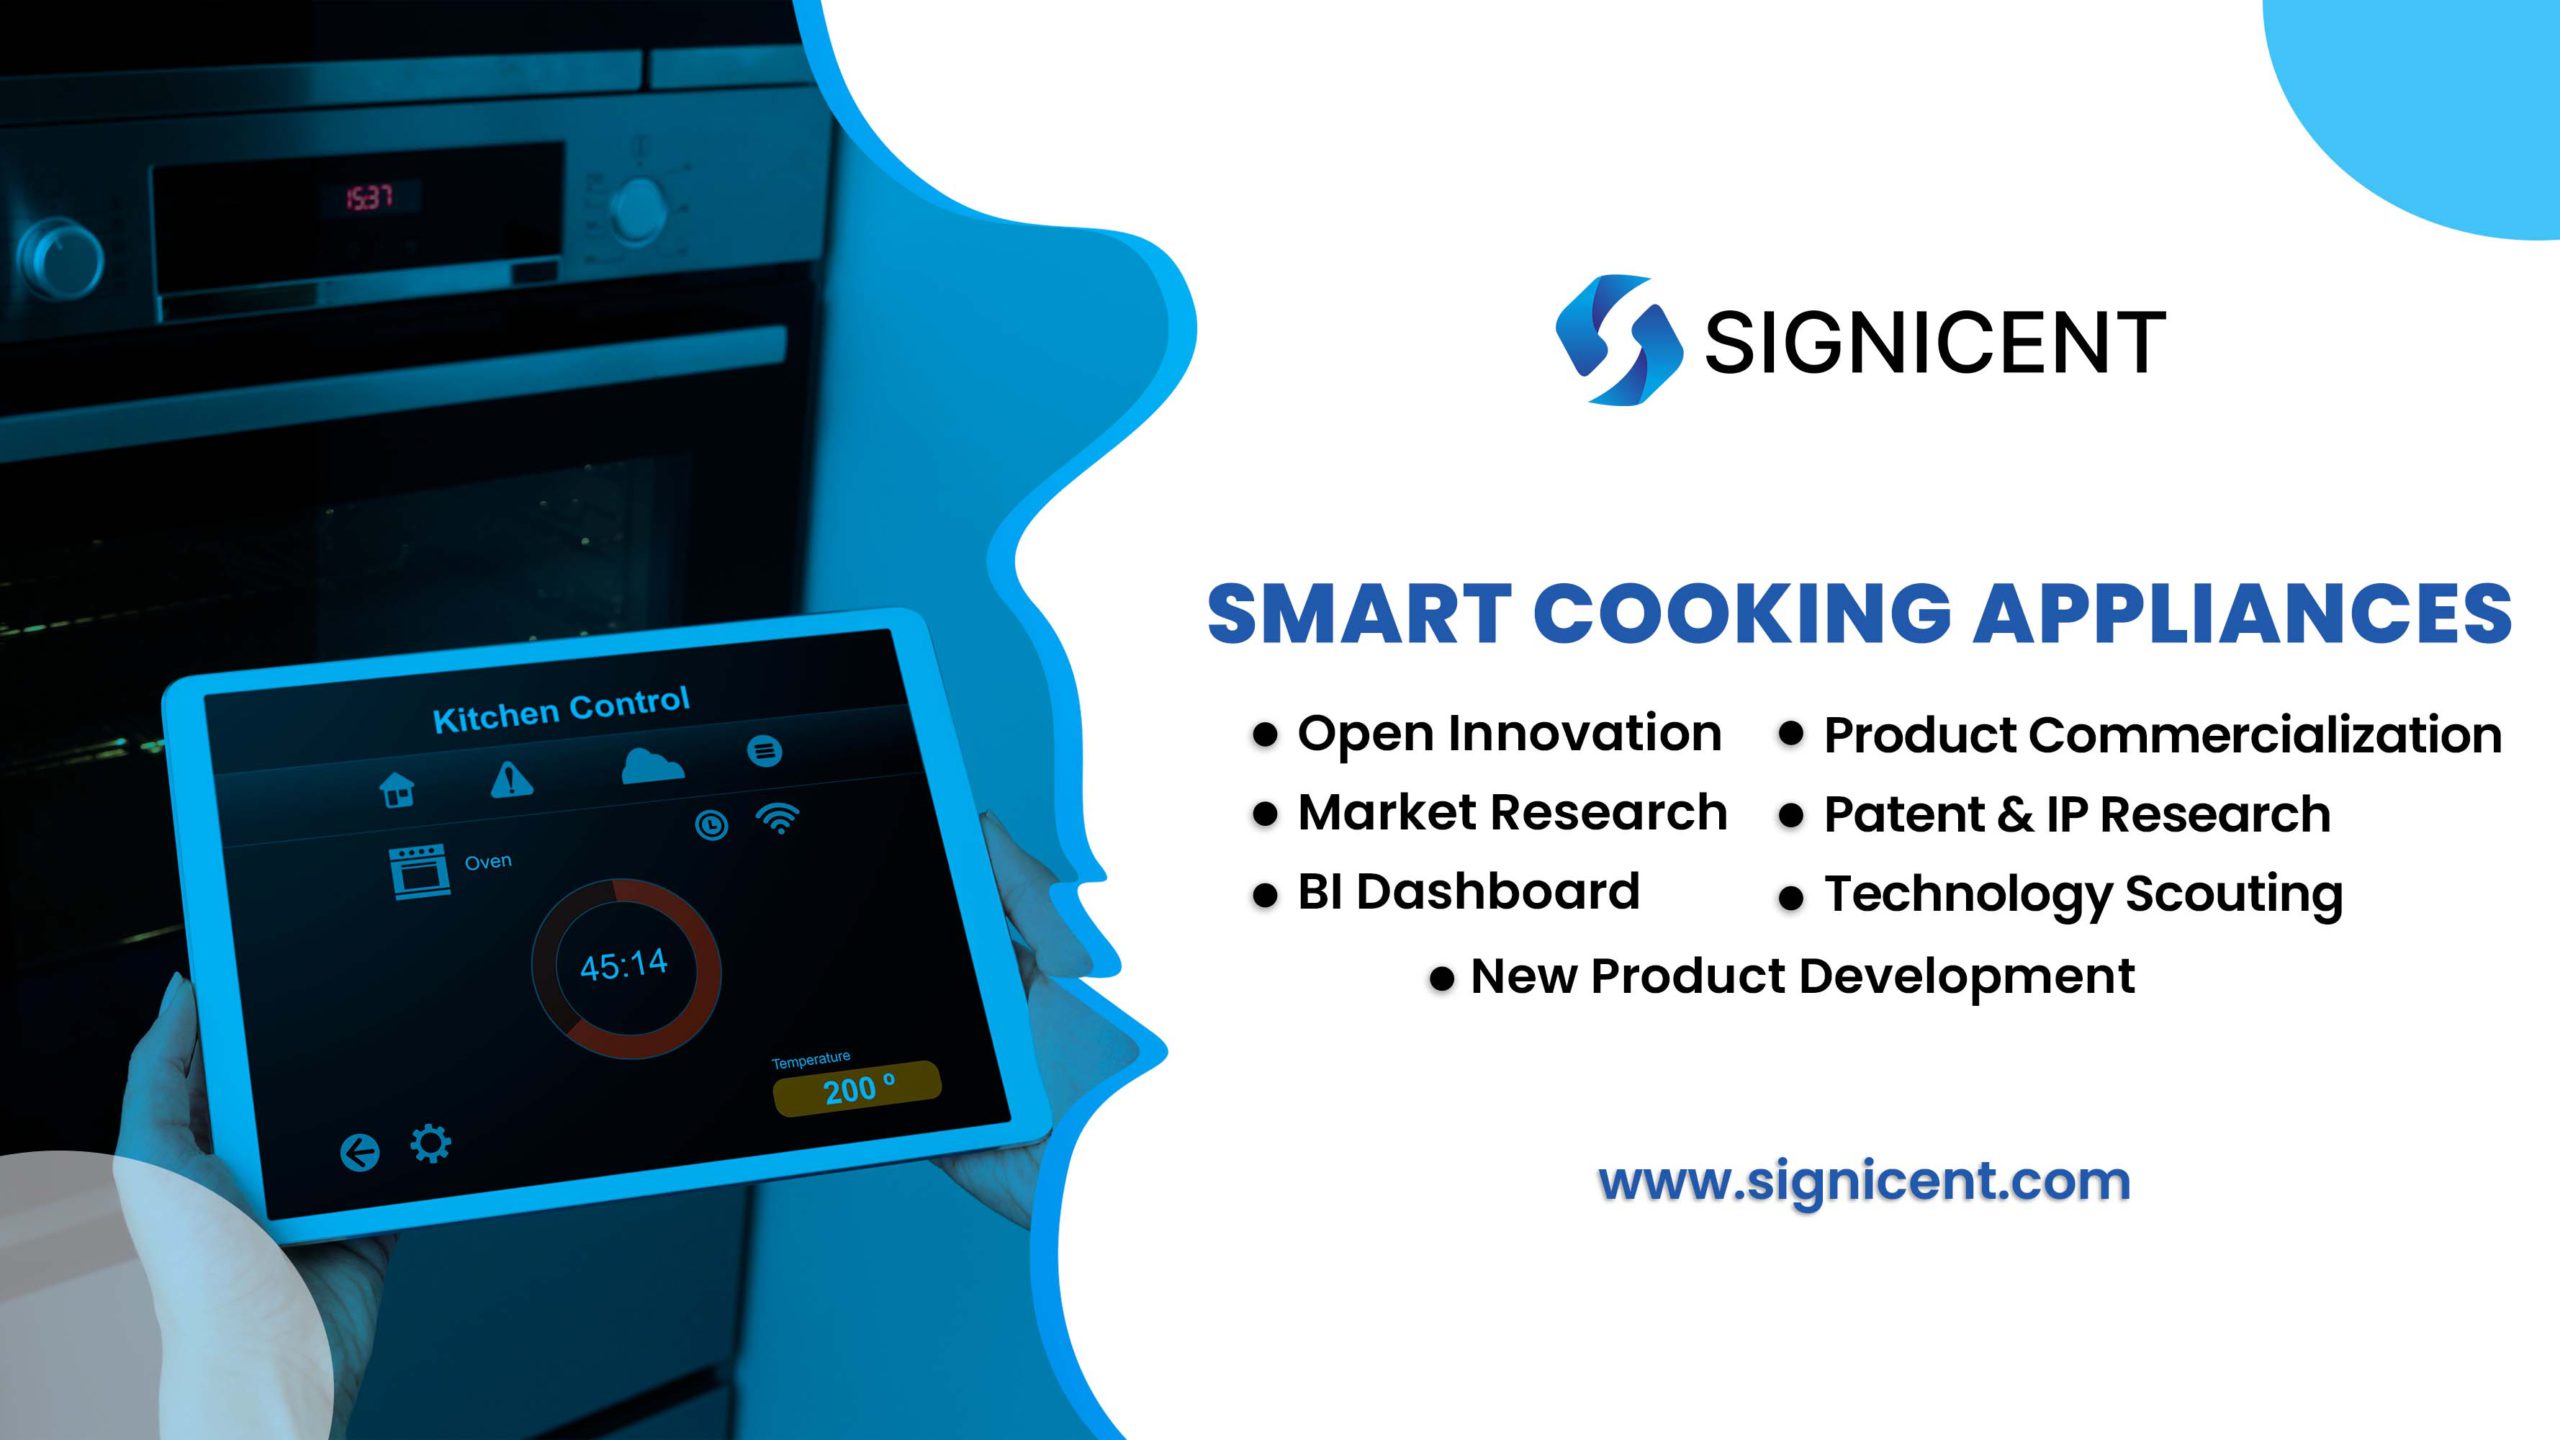 https://signicent.com/wp-content/uploads/2021/05/Smart-Cooking-Appliances-By-Signicent-scaled.jpg